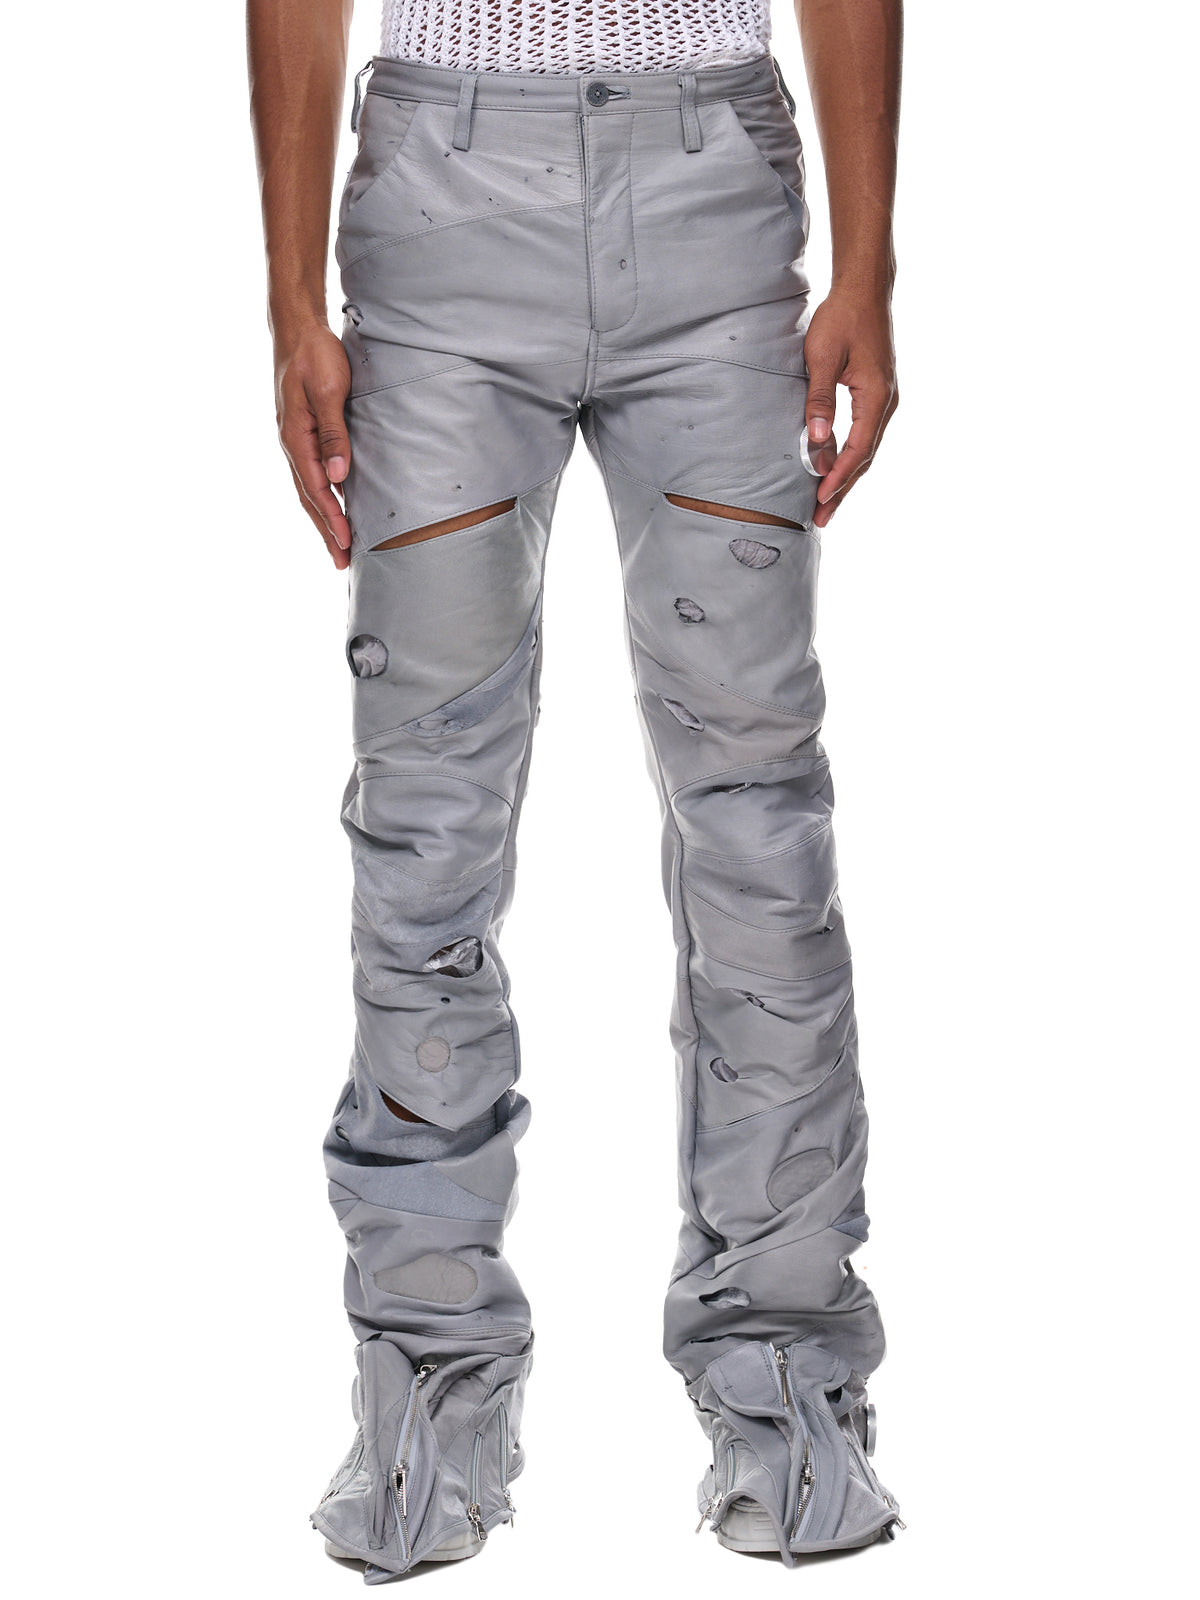 Beaver Leather Shoe Covered Pants (ITHD-B-31-GR-GRAY)